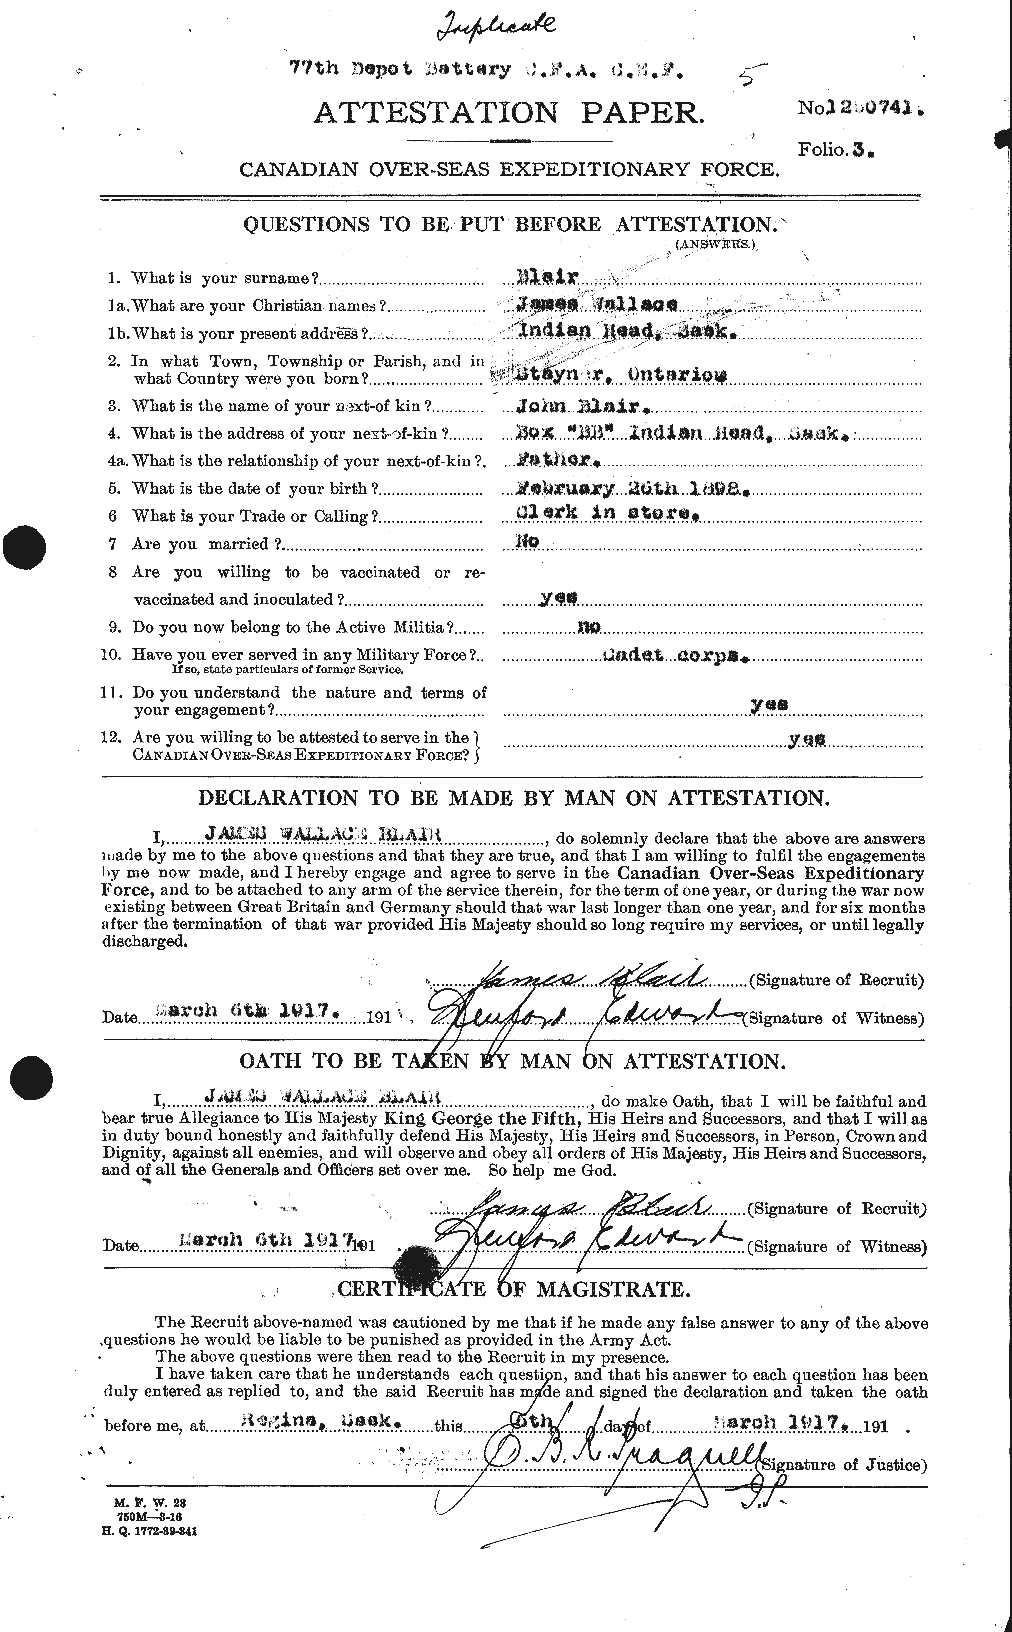 Personnel Records of the First World War - CEF 243075a